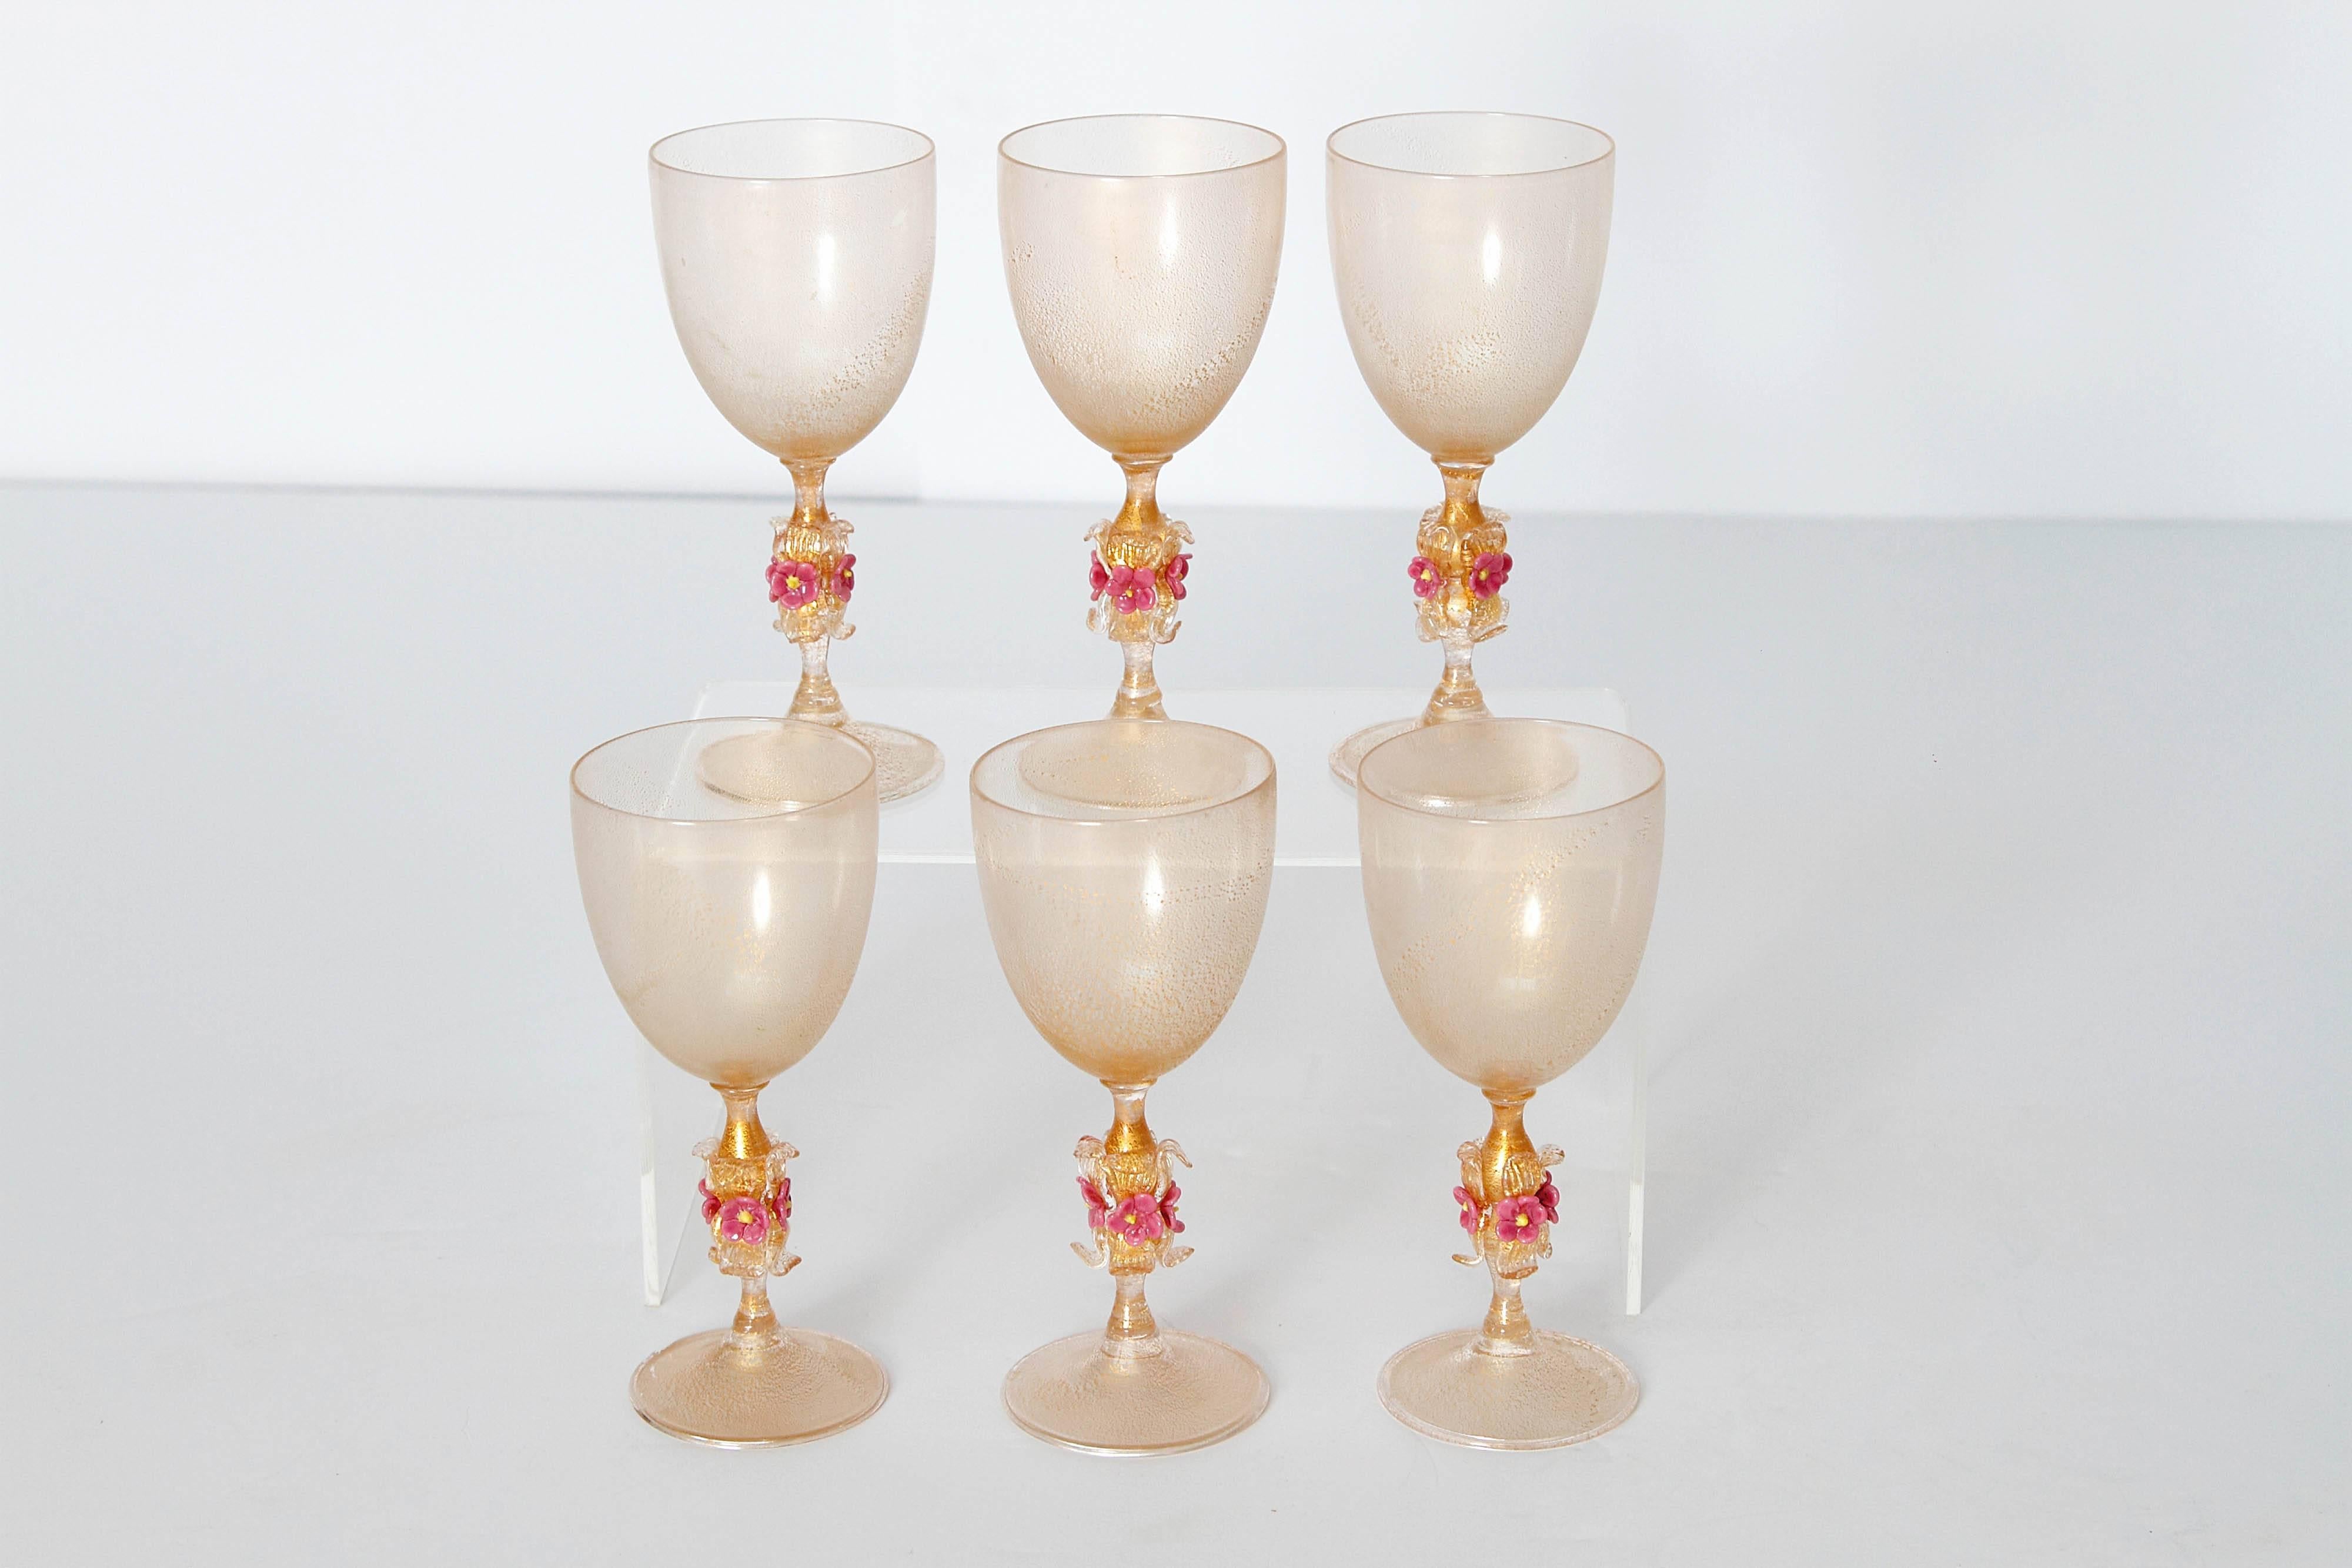 A set of six Murano amber glass wine goblets with gold flecks and floral decoration on stems, Italy 

vintage mouth-blown Venetian glass / stemware.